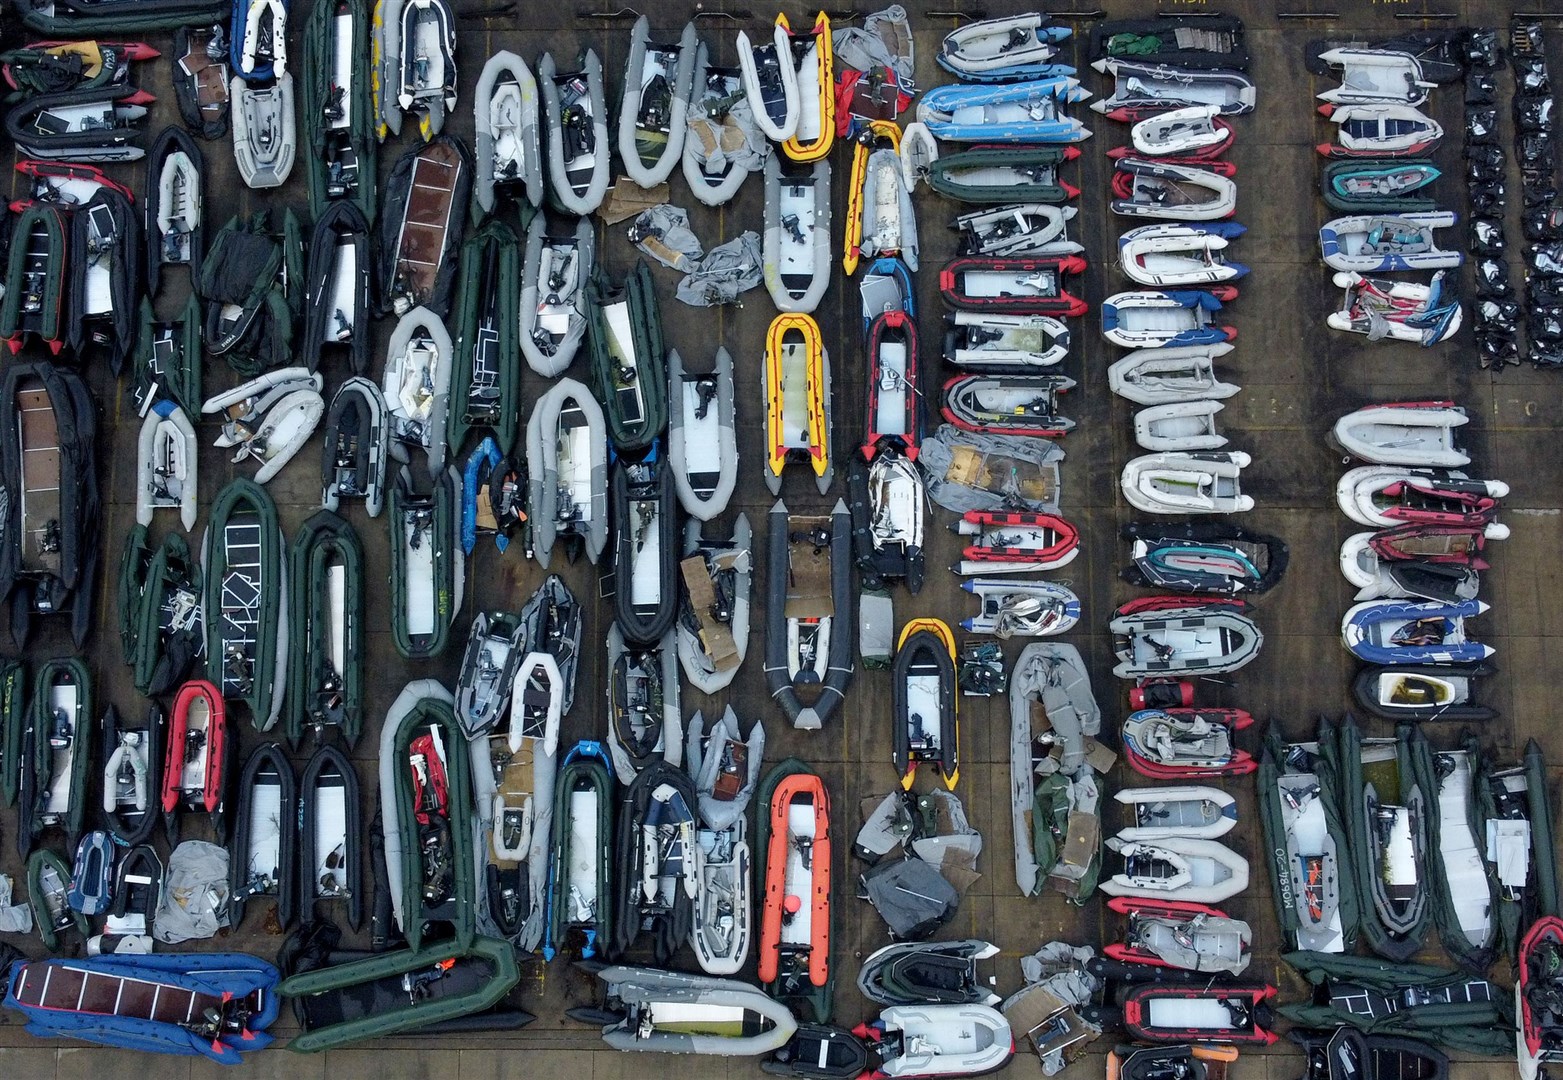 A view of one of two areas now being used at a warehouse facility in Dover, Kent, for boats used by people thought to be migrants (Gareth Fuller/PA)